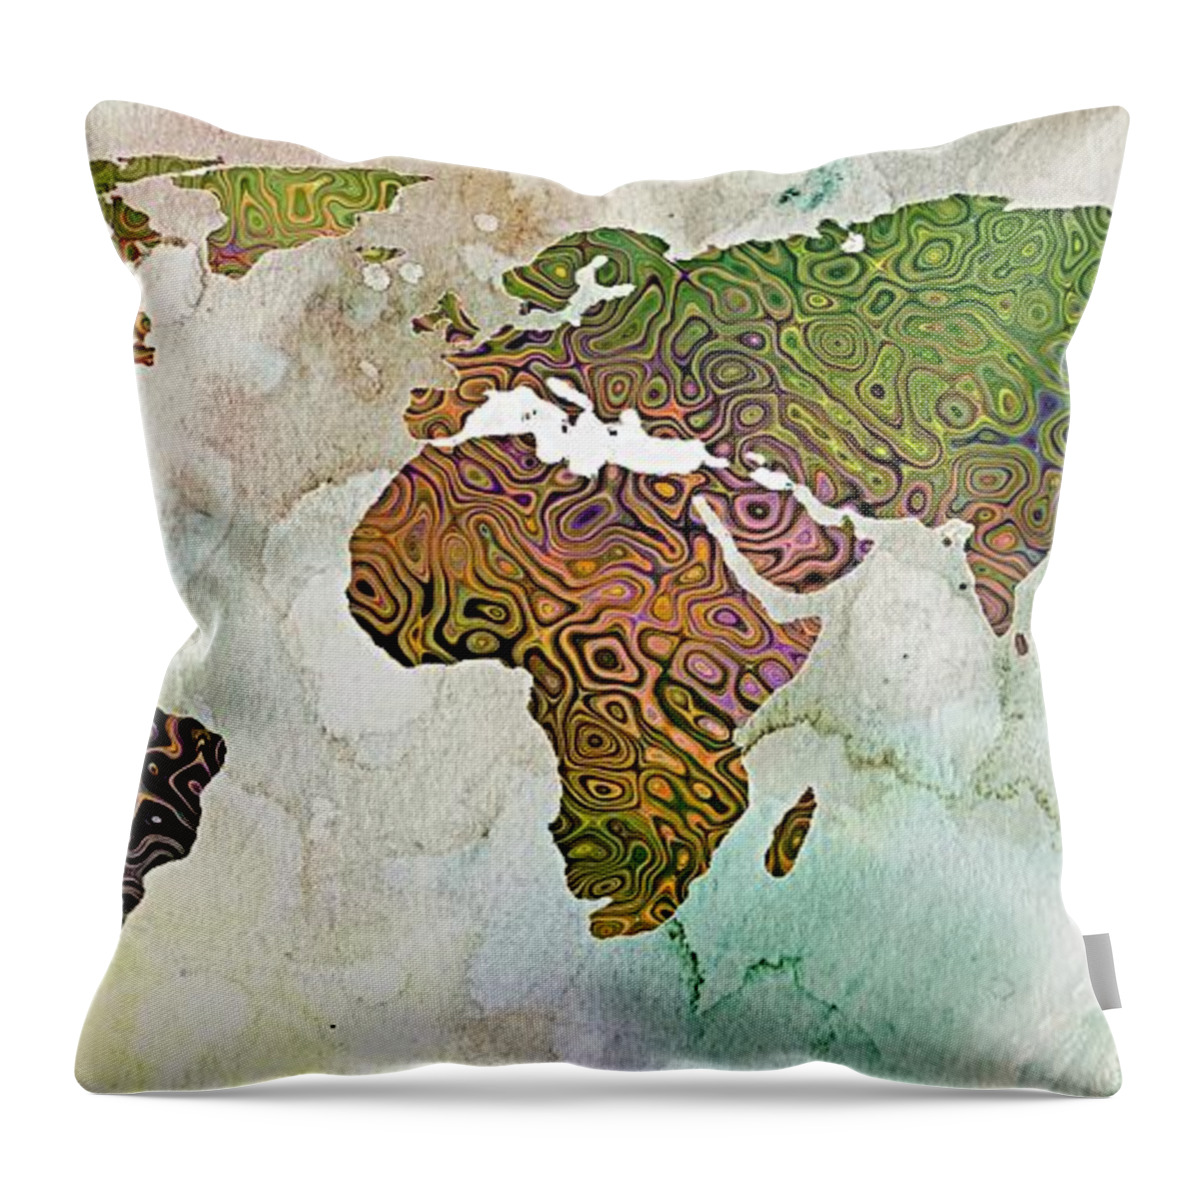 World Map Throw Pillow featuring the painting World Map Relief by Dragica Micki Fortuna